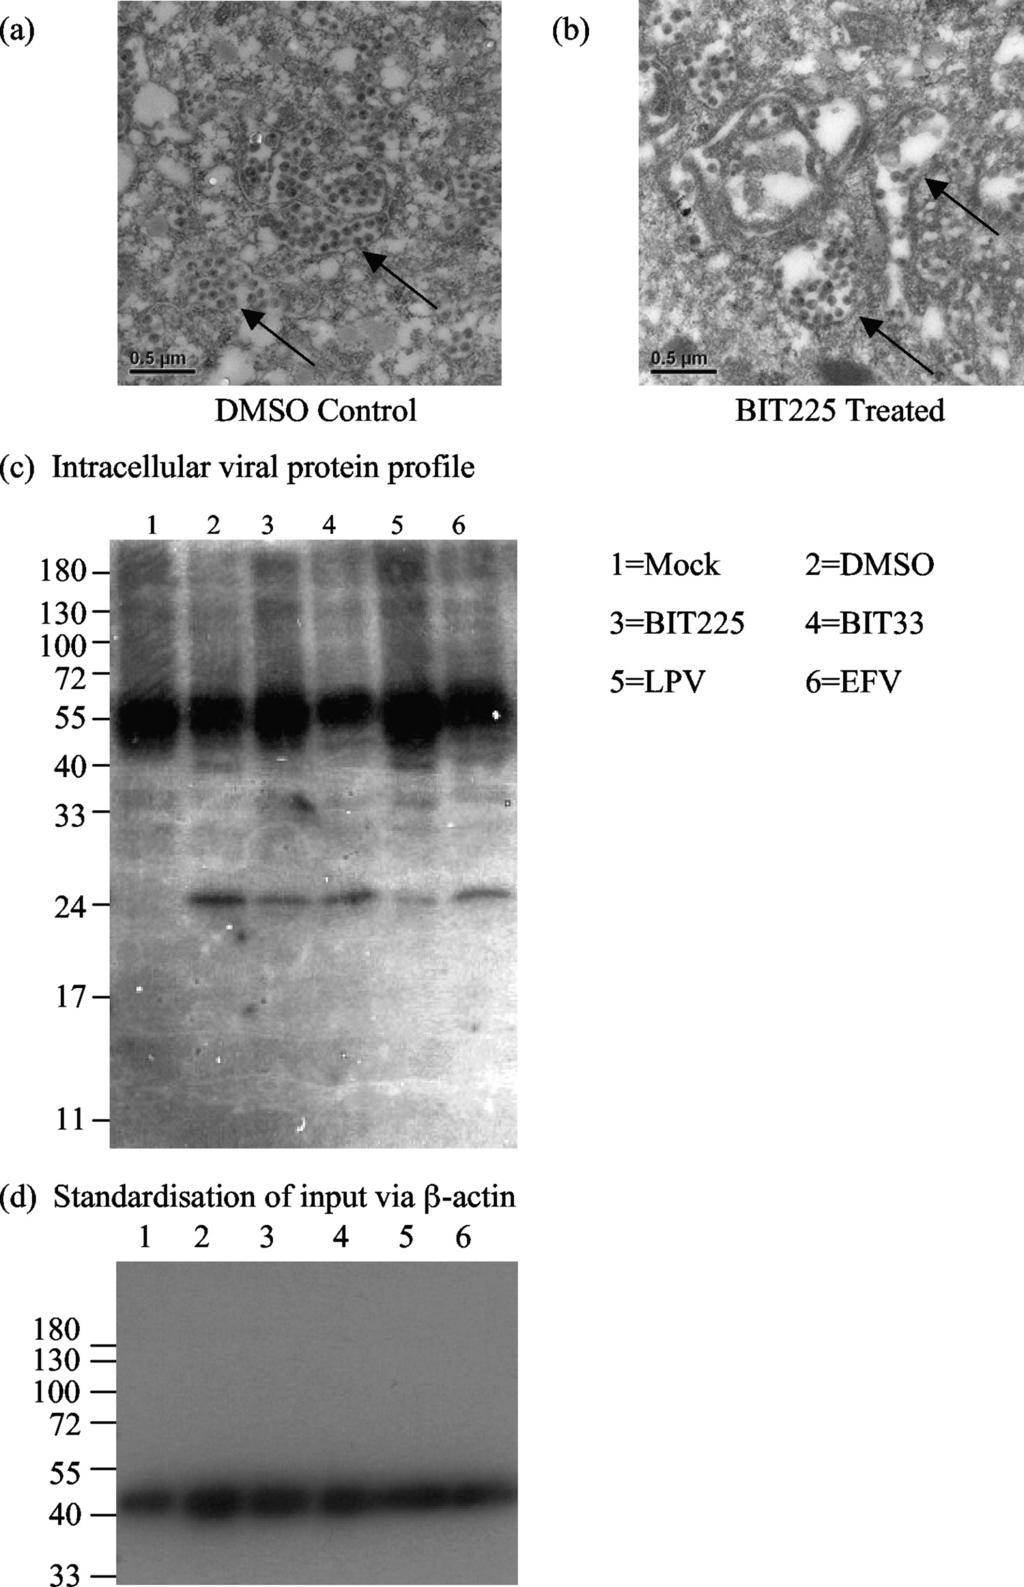 VOL. 54, 2010 BIT225, A NOVEL ANTI-HIV-1 COMPOUND TARGETING Vpu 843 FIG. 5. BIT225 results in defects in virion assembly.